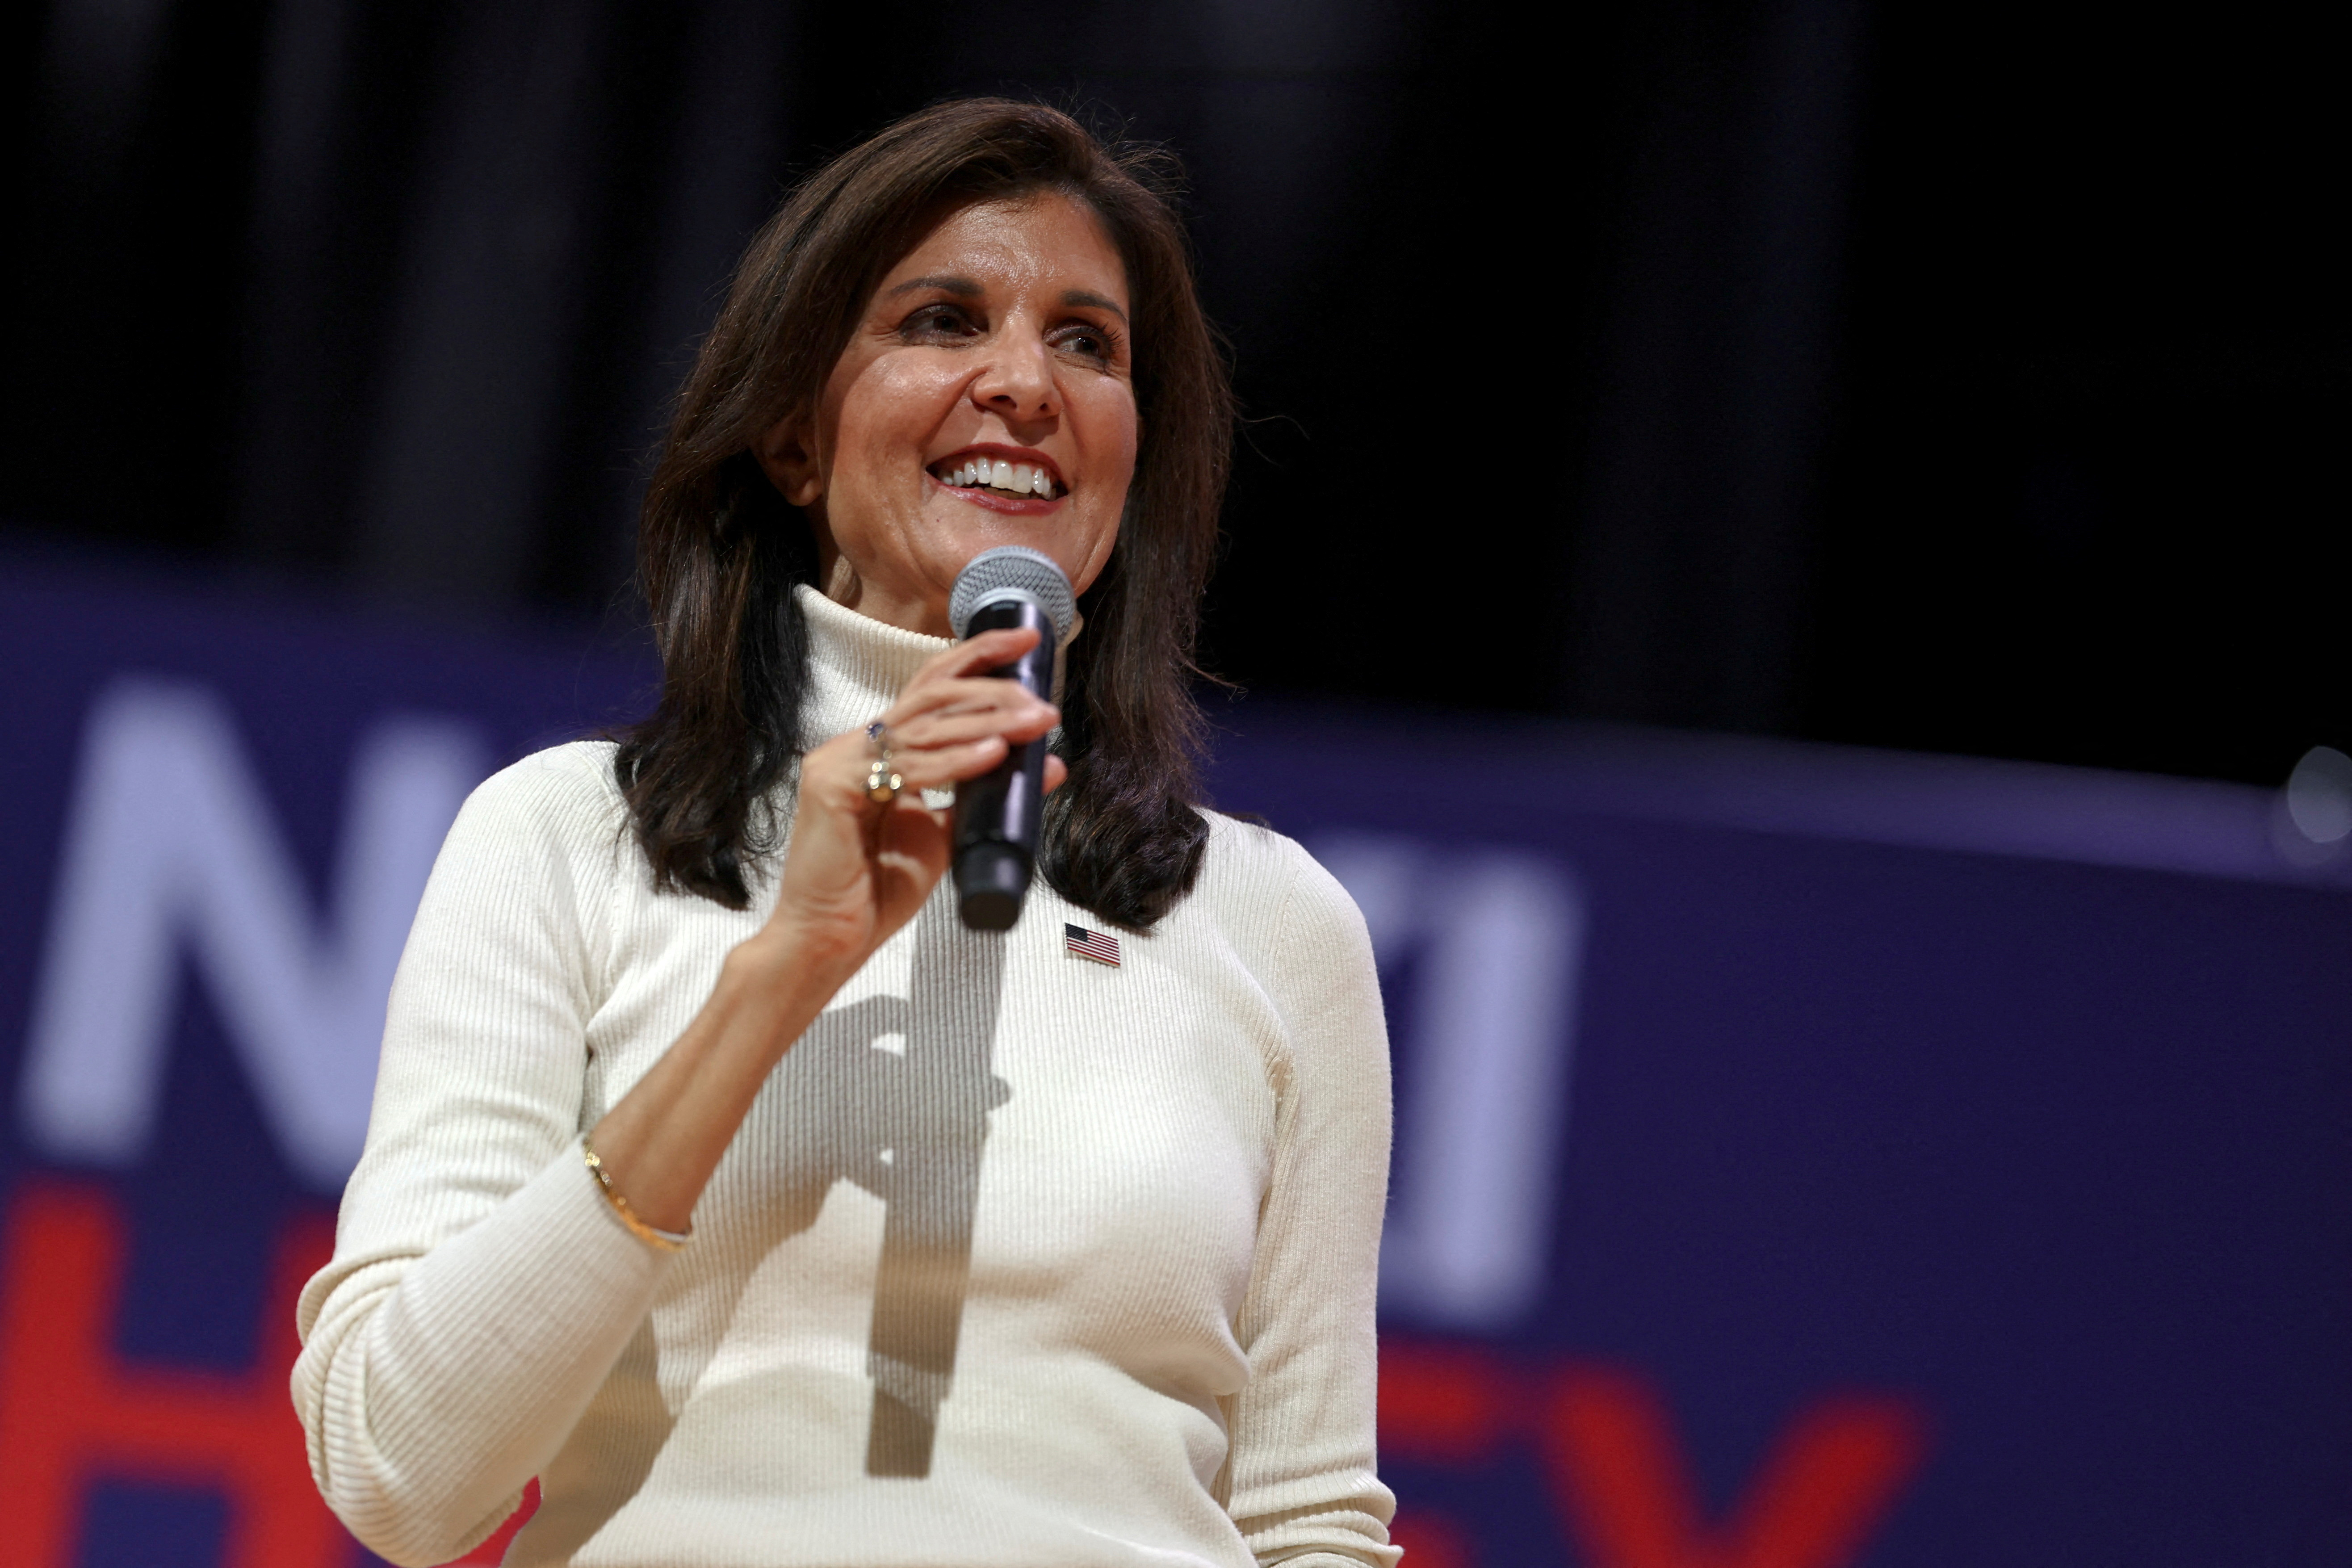 Republican presidential candidate Nikki Haley campaigns in South Carolina